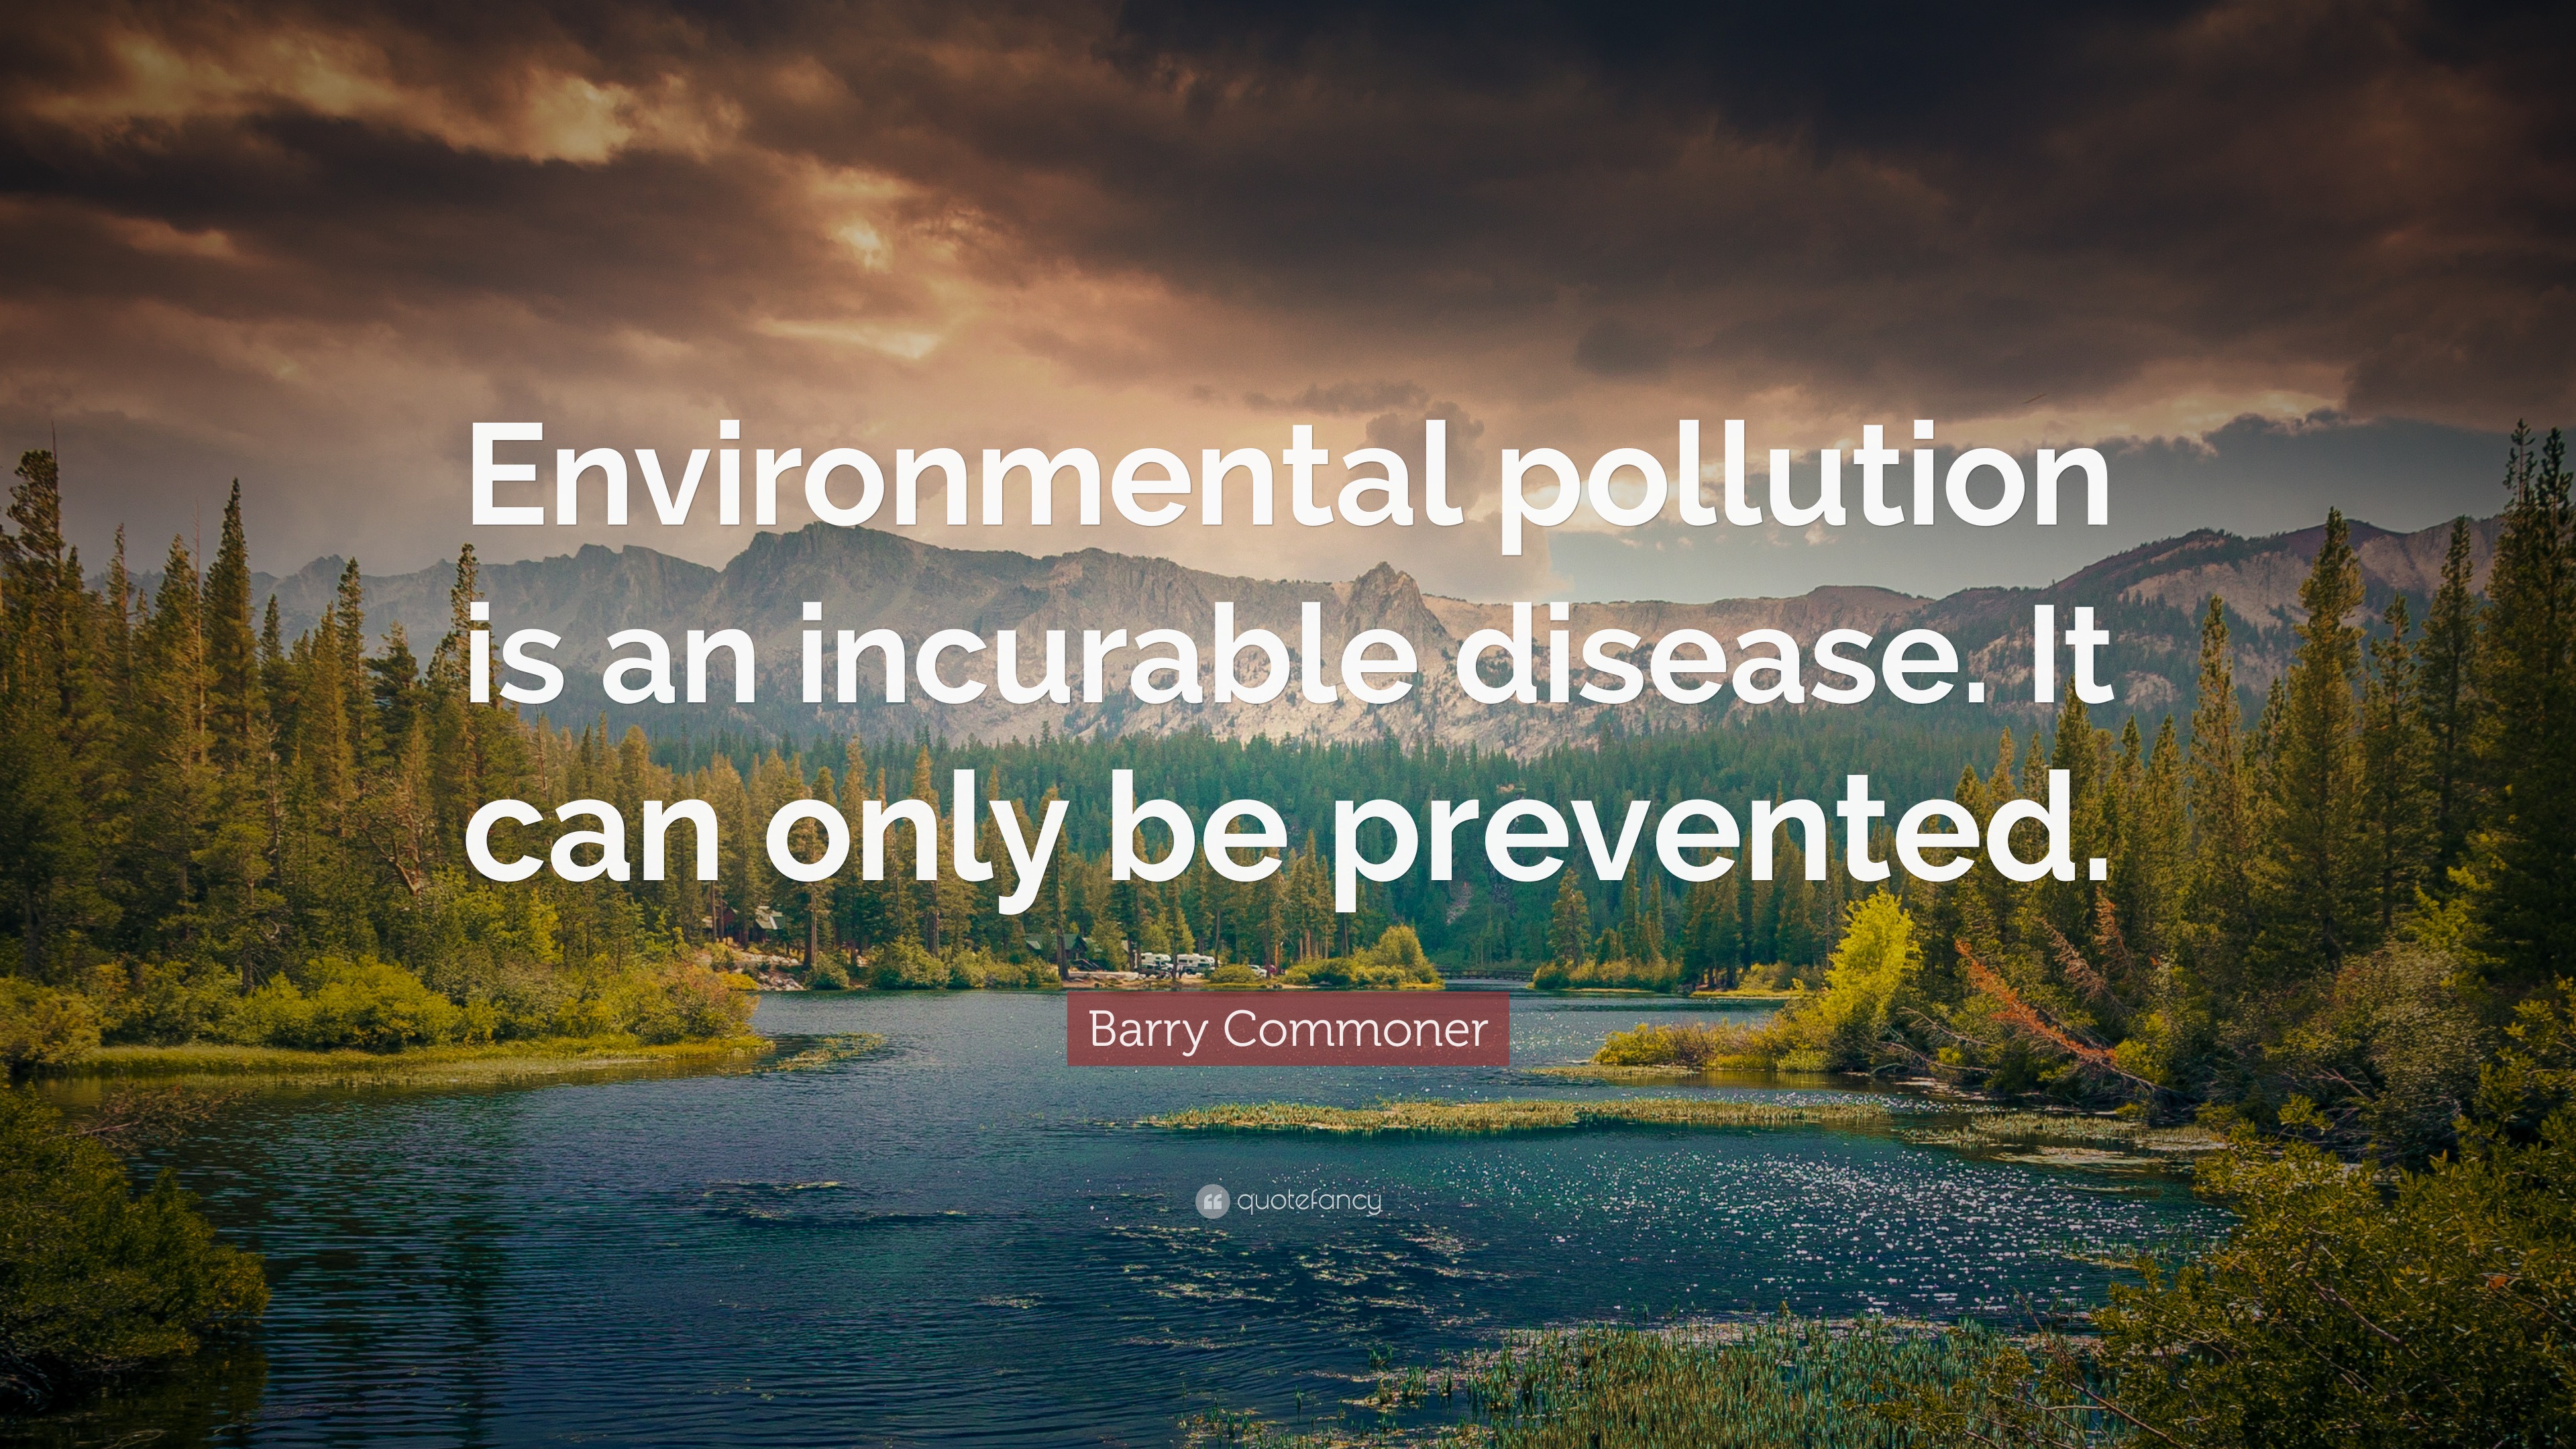 Barry Commoner Quote: “Environmental pollution is an incurable disease